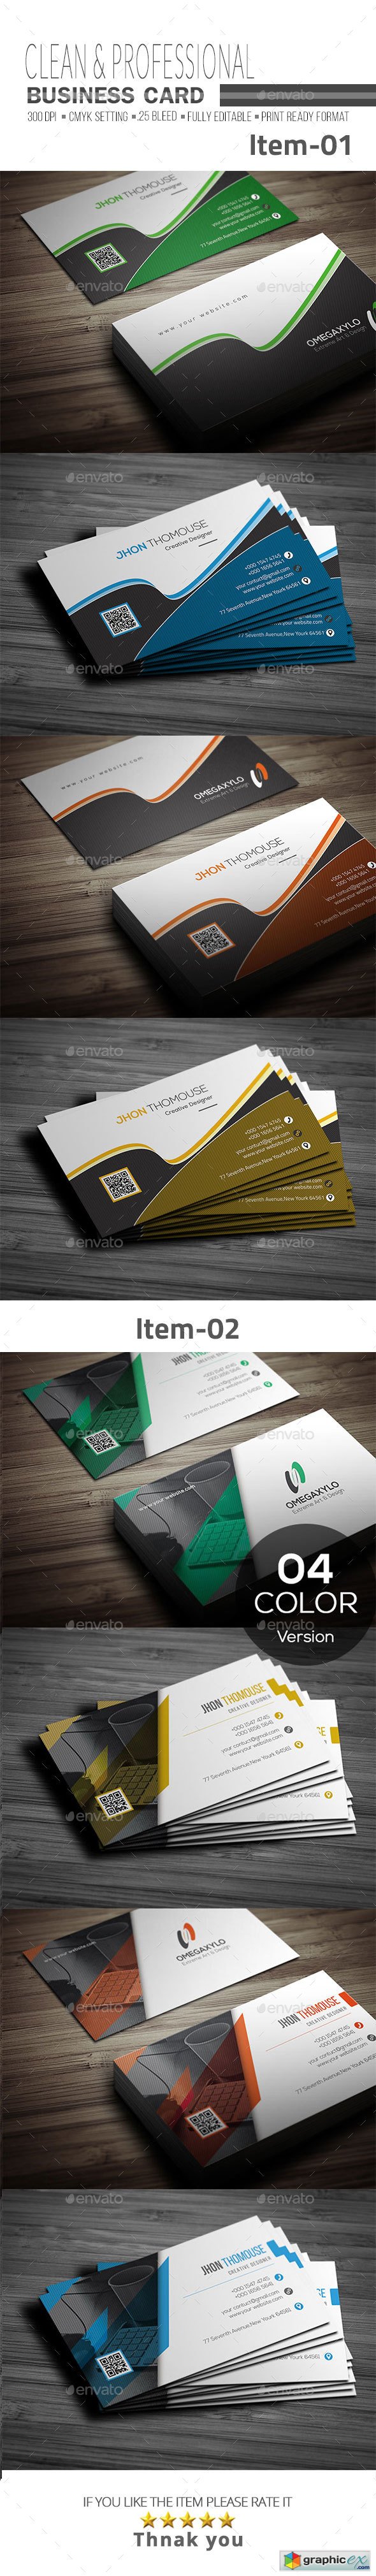 Business Card Bundle 2 In 1 20568289